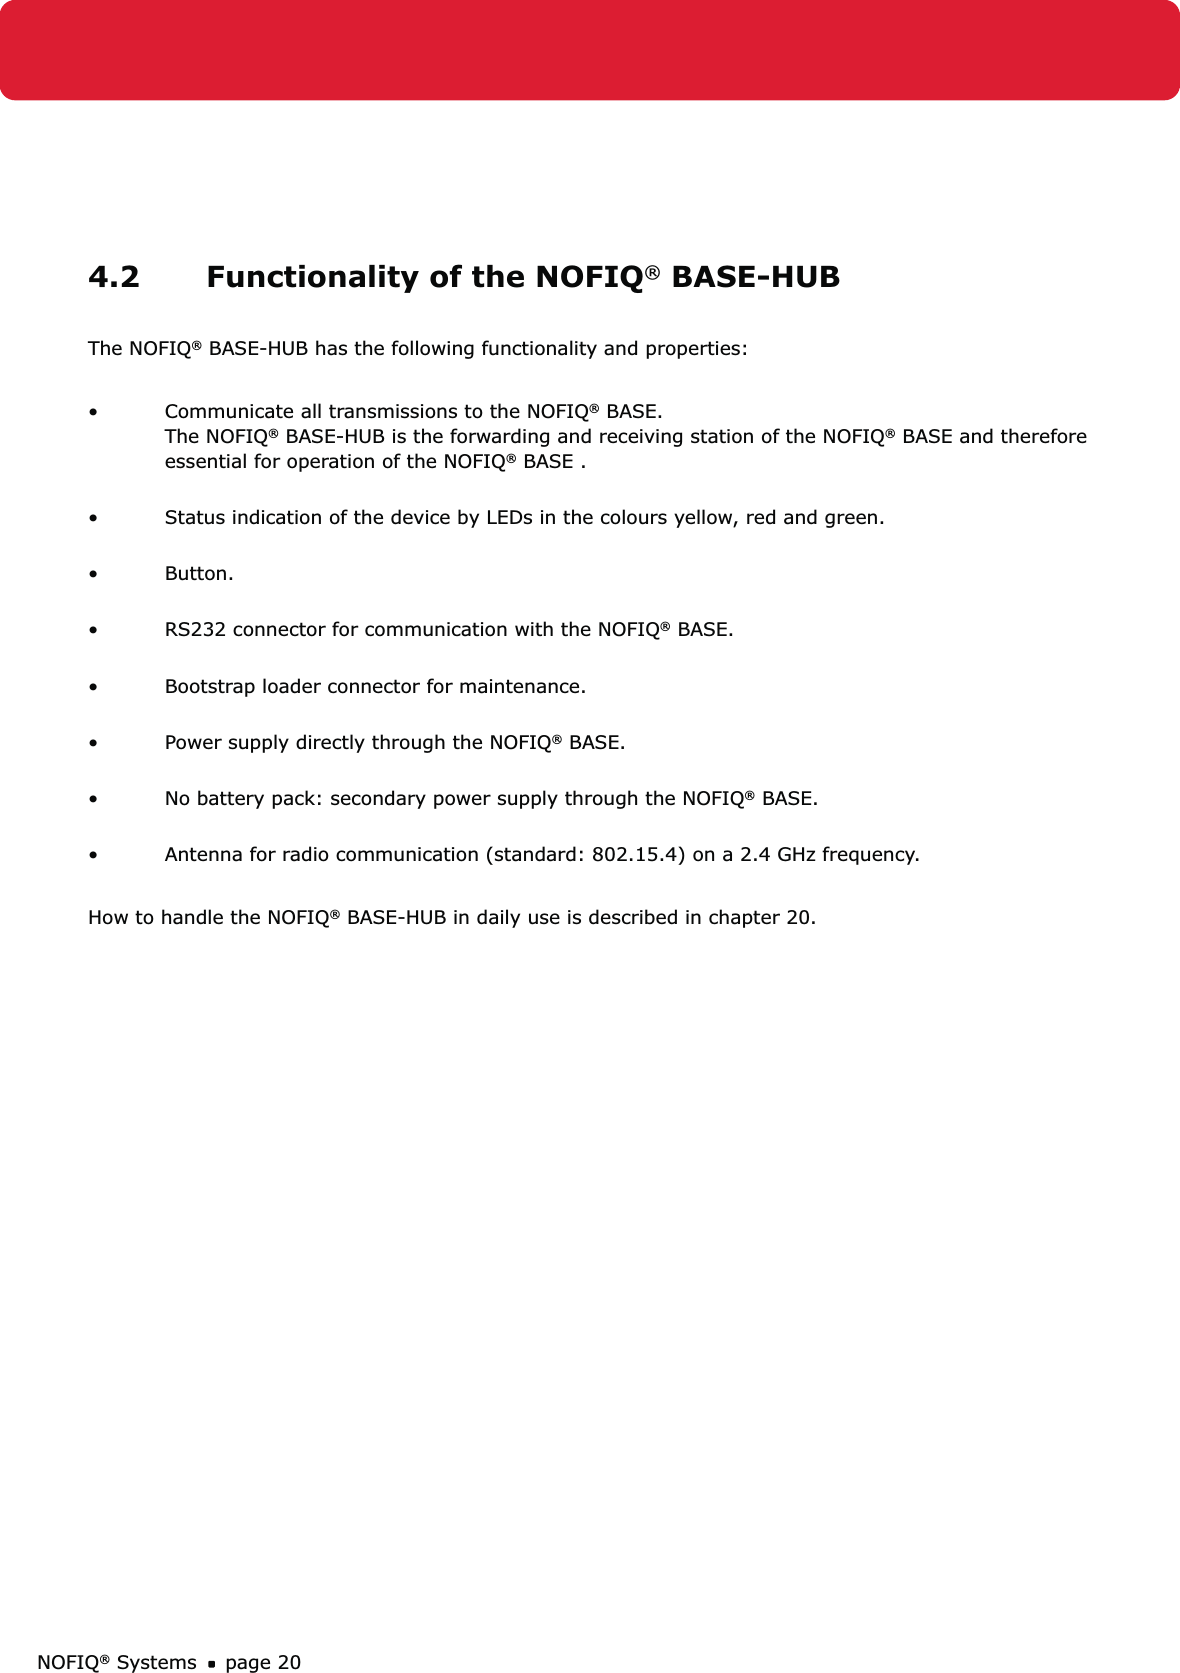 NOFIQ® Systems page 204.2  Functionality of the NOFIQ® BASE-HUBThe NOFIQ® BASE-HUB has the following functionality and properties:Communicate all transmissions to the NOFIQ•  ® BASE. The NOFIQ® BASE-HUB is the forwarding and receiving station of the NOFIQ® BASE and therefore essential for operation of the NOFIQ® BASE . Status indication of the device by LEDs in the colours yellow, red and green. • Button. • RS232 connector for communication with the NOFIQ•  ® BASE. Bootstrap loader connector for maintenance. • Power supply directly through the NOFIQ•  ® BASE. No battery pack: secondary power supply through the NOFIQ•  ® BASE.  Antenna for radio communication (standard: 802.15.4) on a 2.4 GHz frequency.• How to handle the NOFIQ® BASE-HUB in daily use is described in chapter 20.